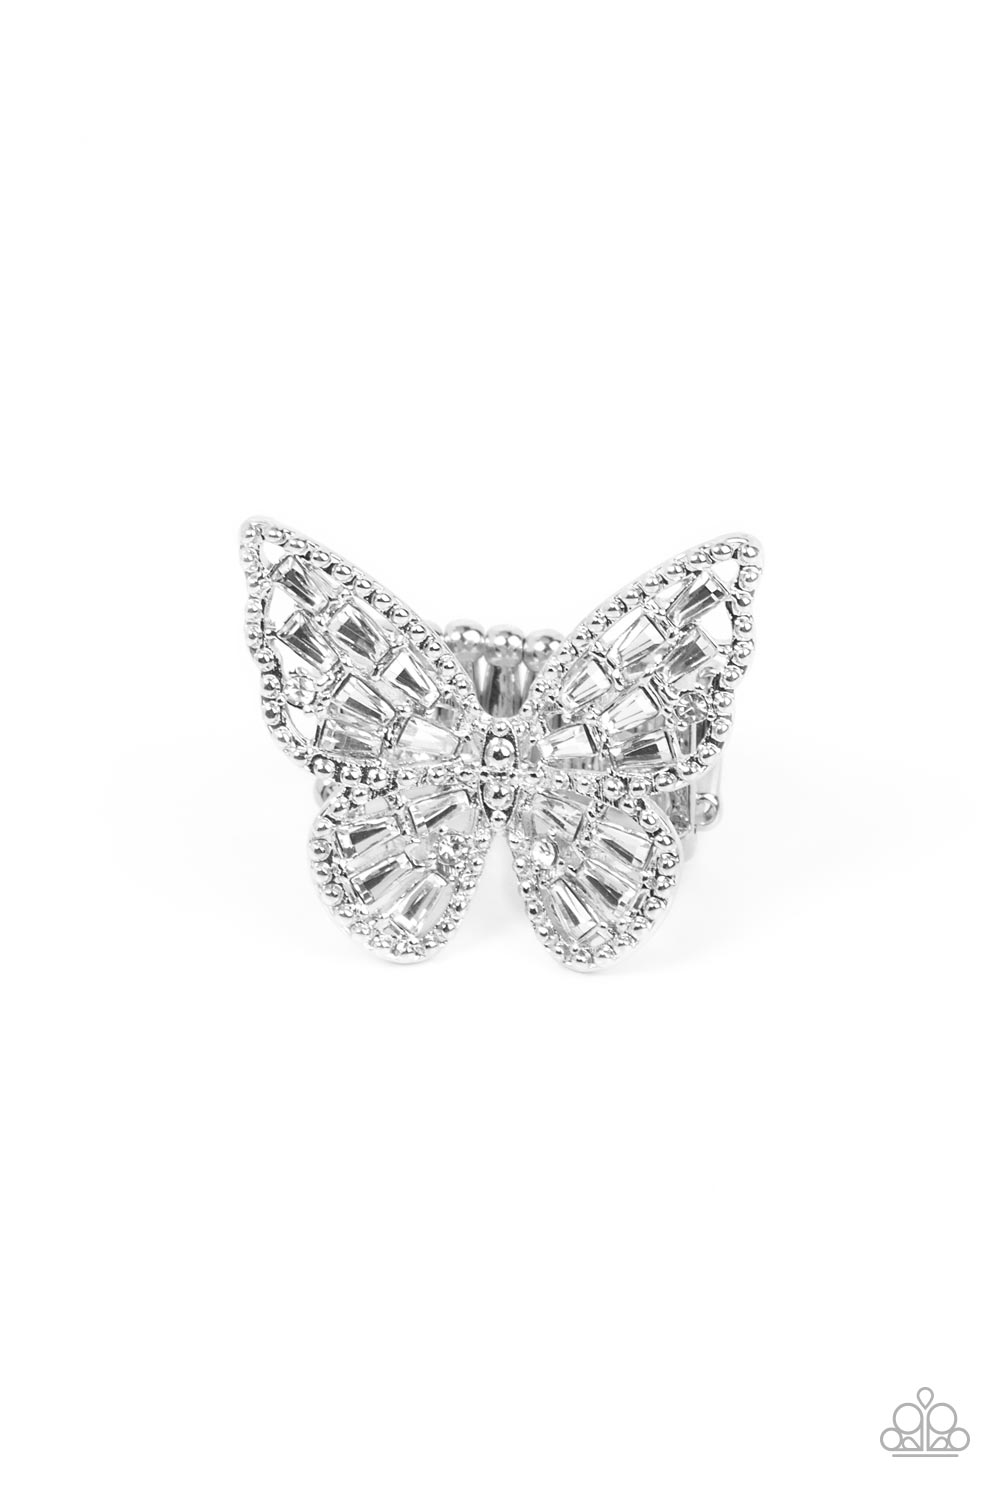 Paparazzi Accessories - Bright-Eyed Butterfly - White Rings a glitzy collection of emerald cut rhinestones are sprinkled across the studded wings of a shiny silver butterfly, resulting in a whimsical centerpiece atop the finger. Features a stretchy band for a flexible fit.  Sold as one individual ring.